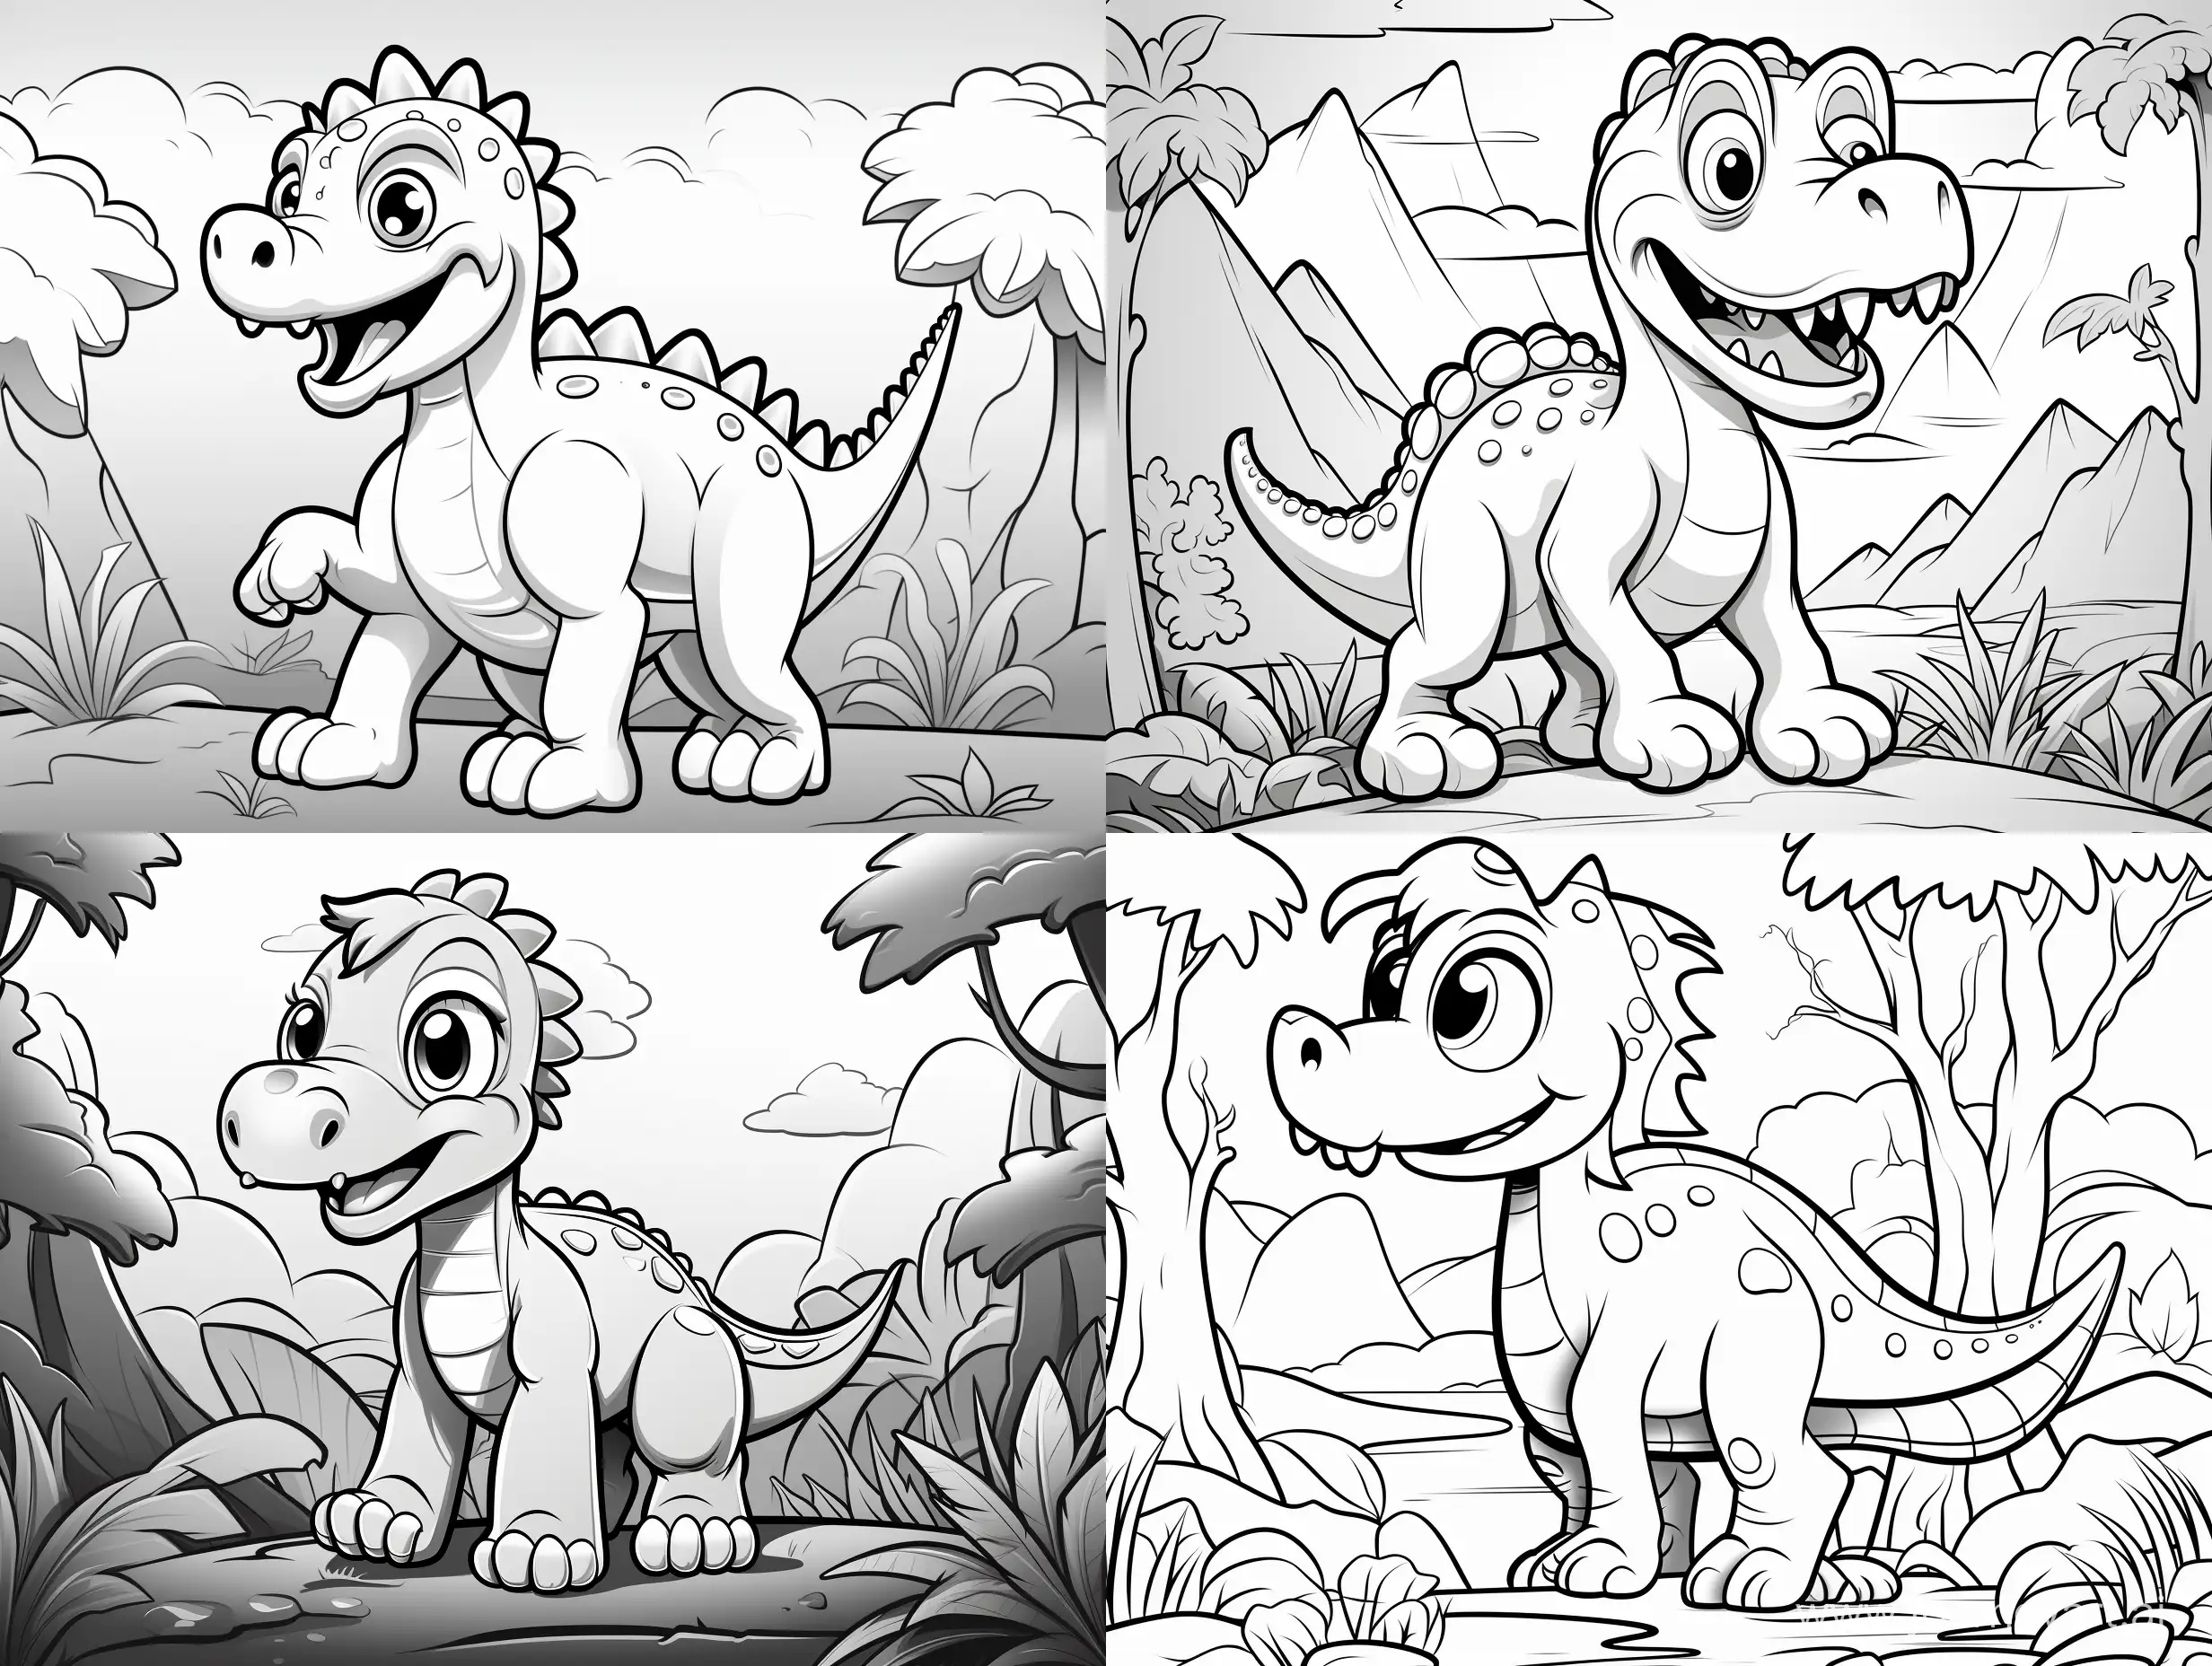 
Black and white contour dinosaur cartoon for couloring for kids age 1-4 cute